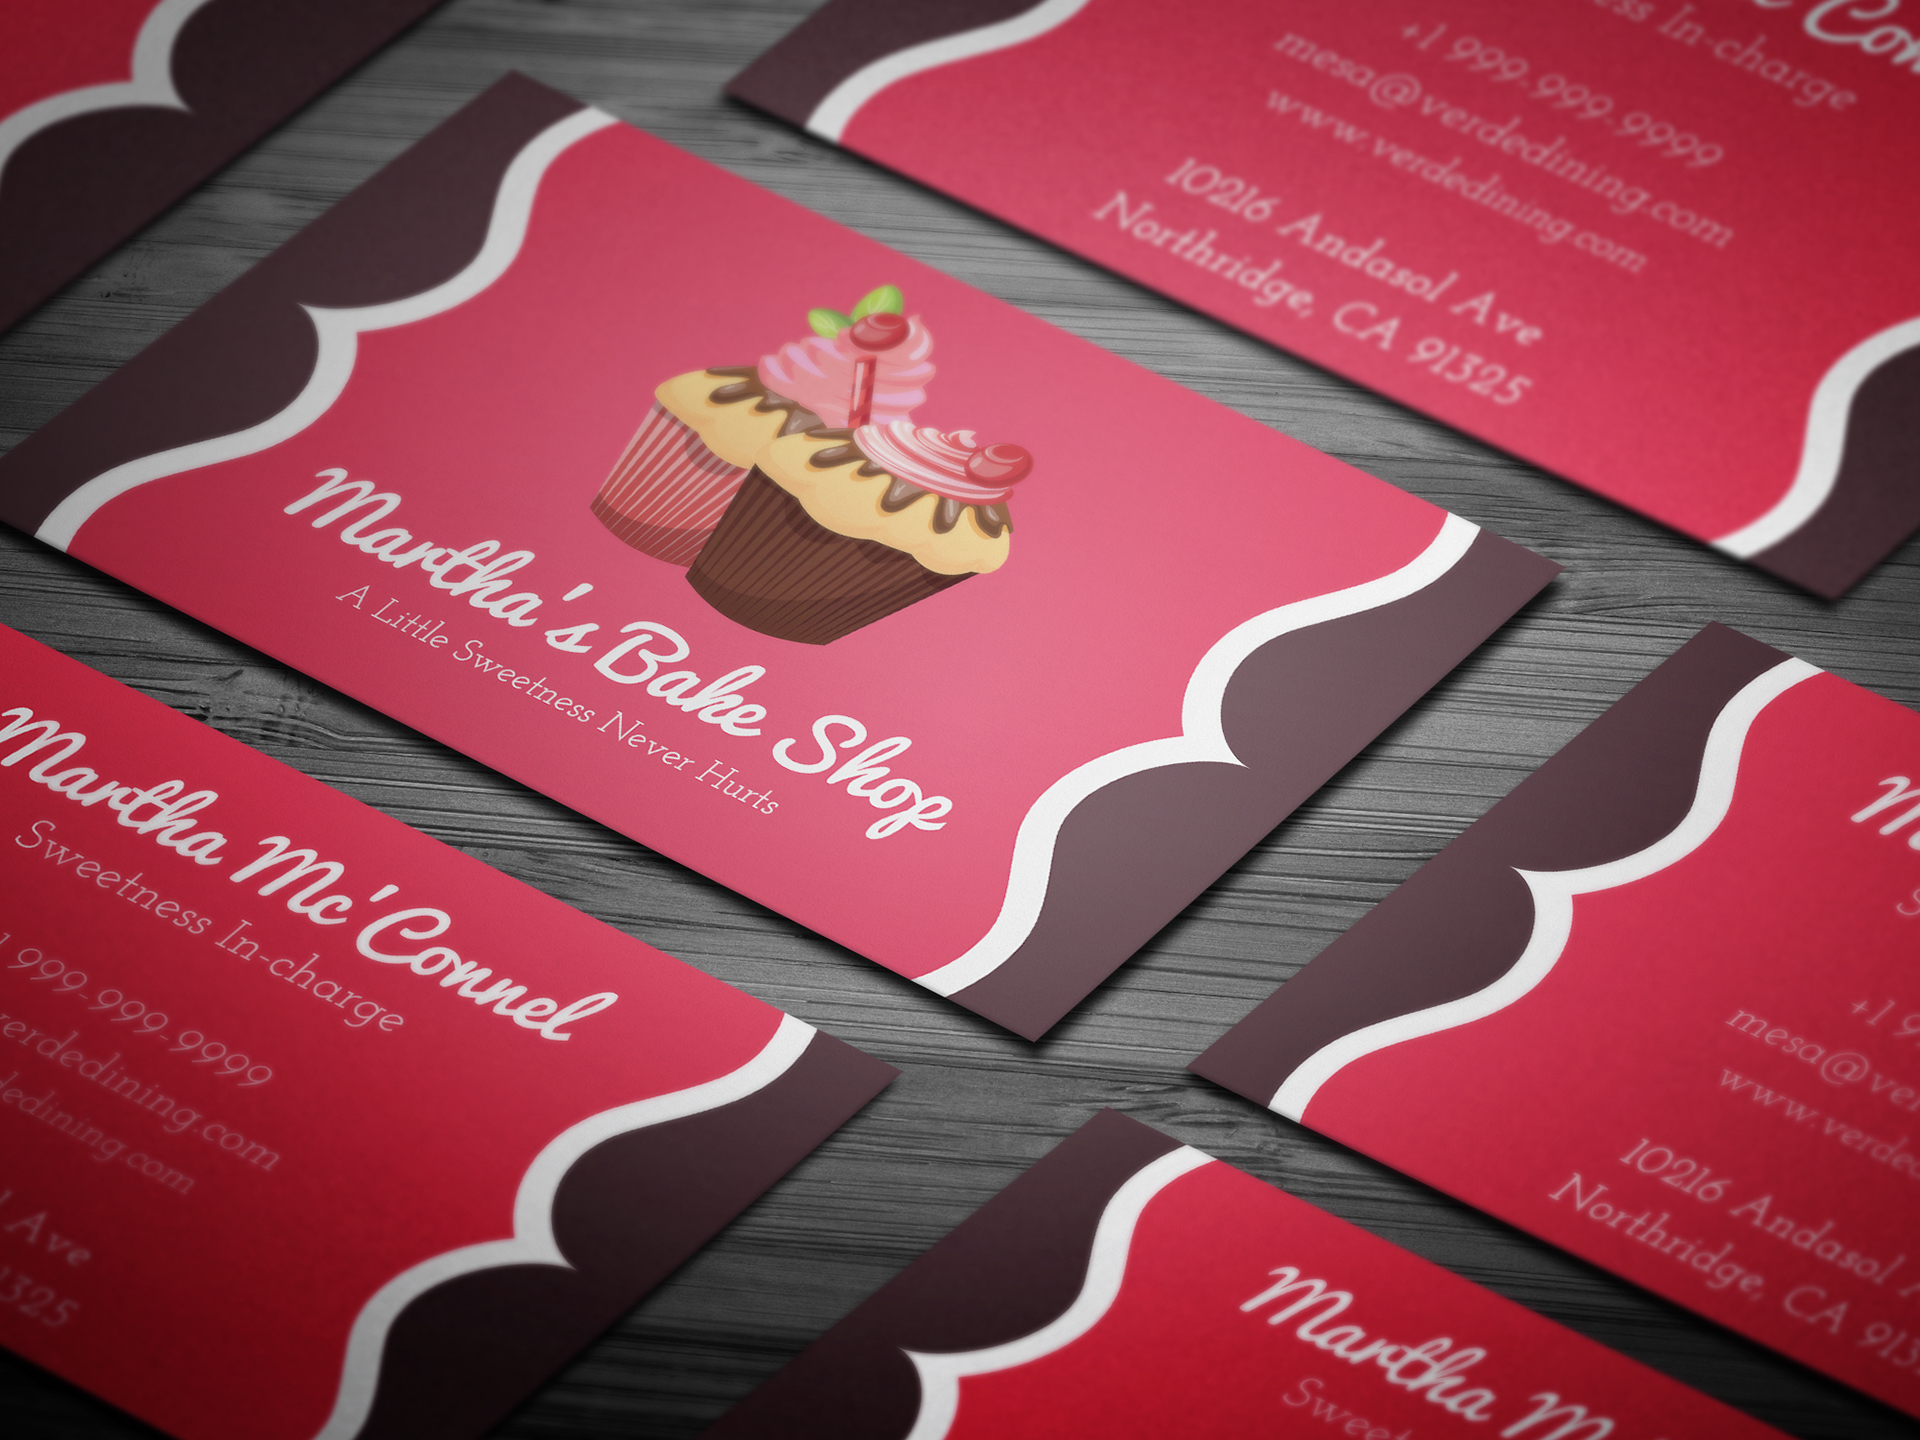 cake business cards templates free 2